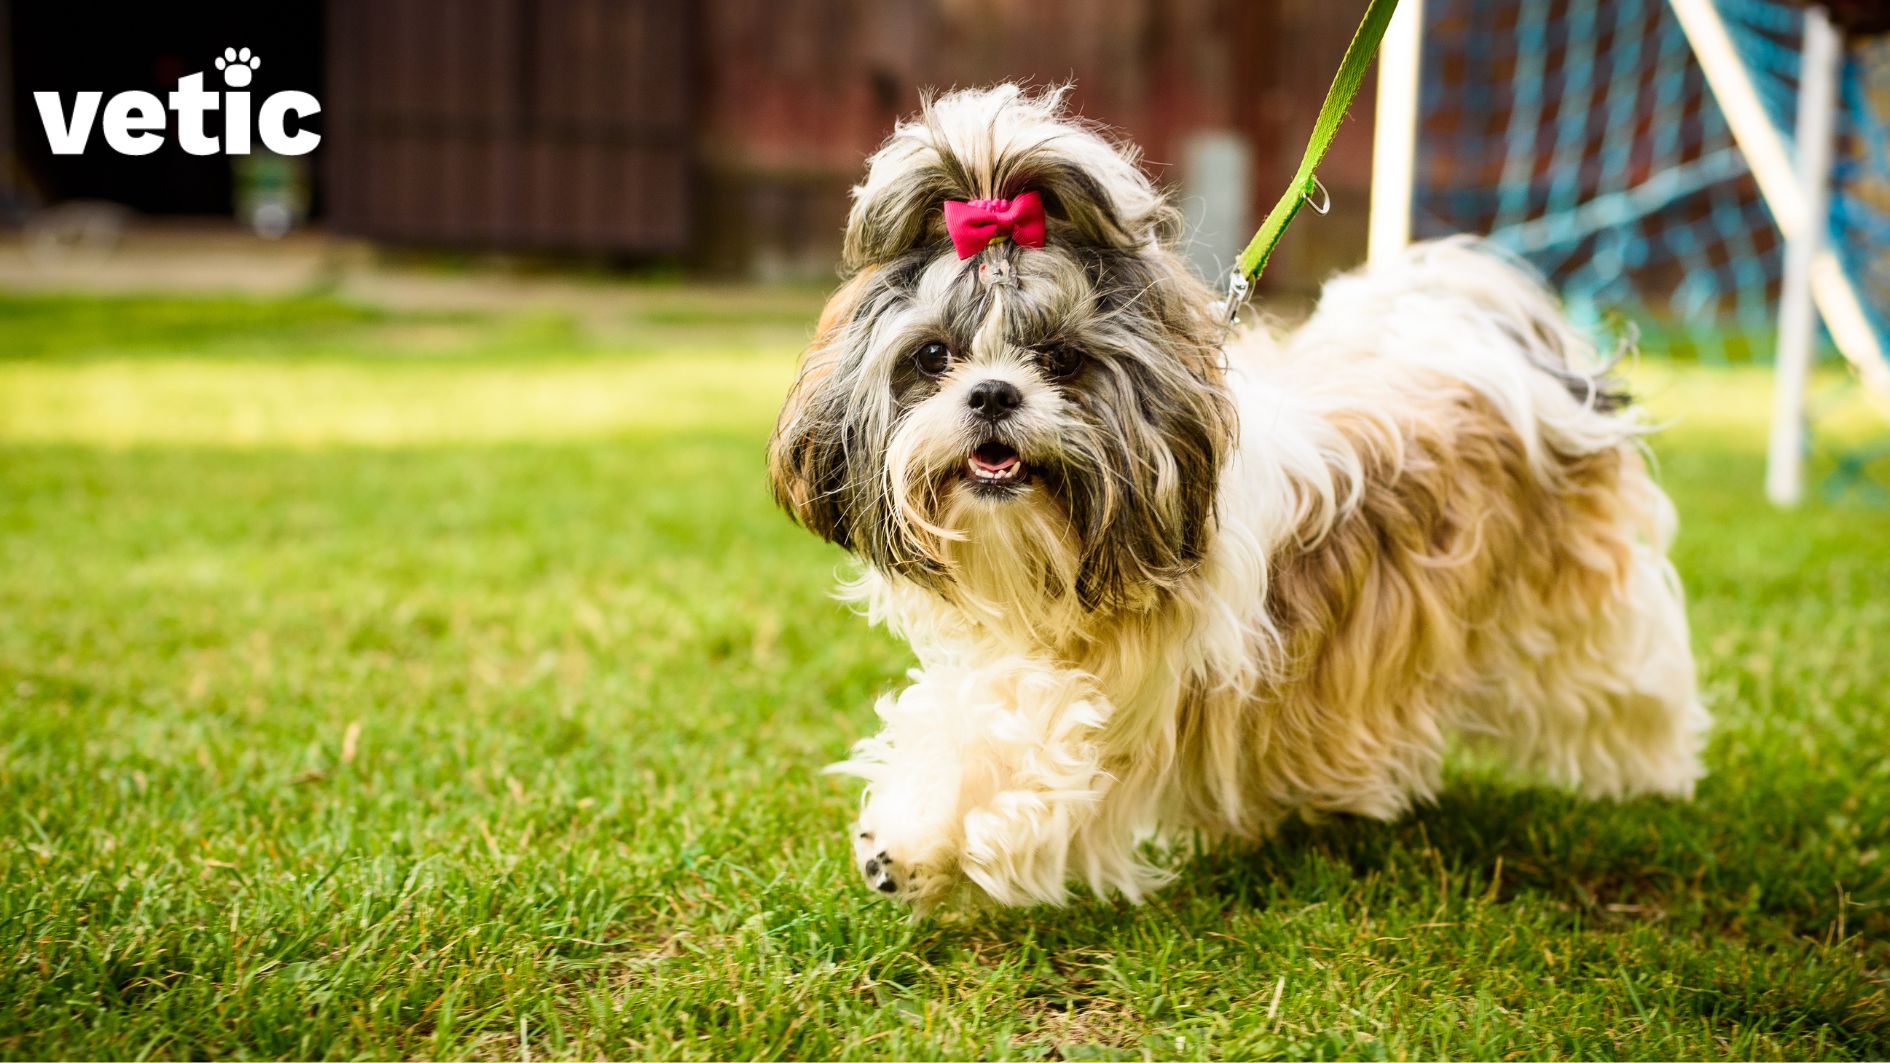 8 Types Of Shih Tzu Breeds - All You Need To Know!